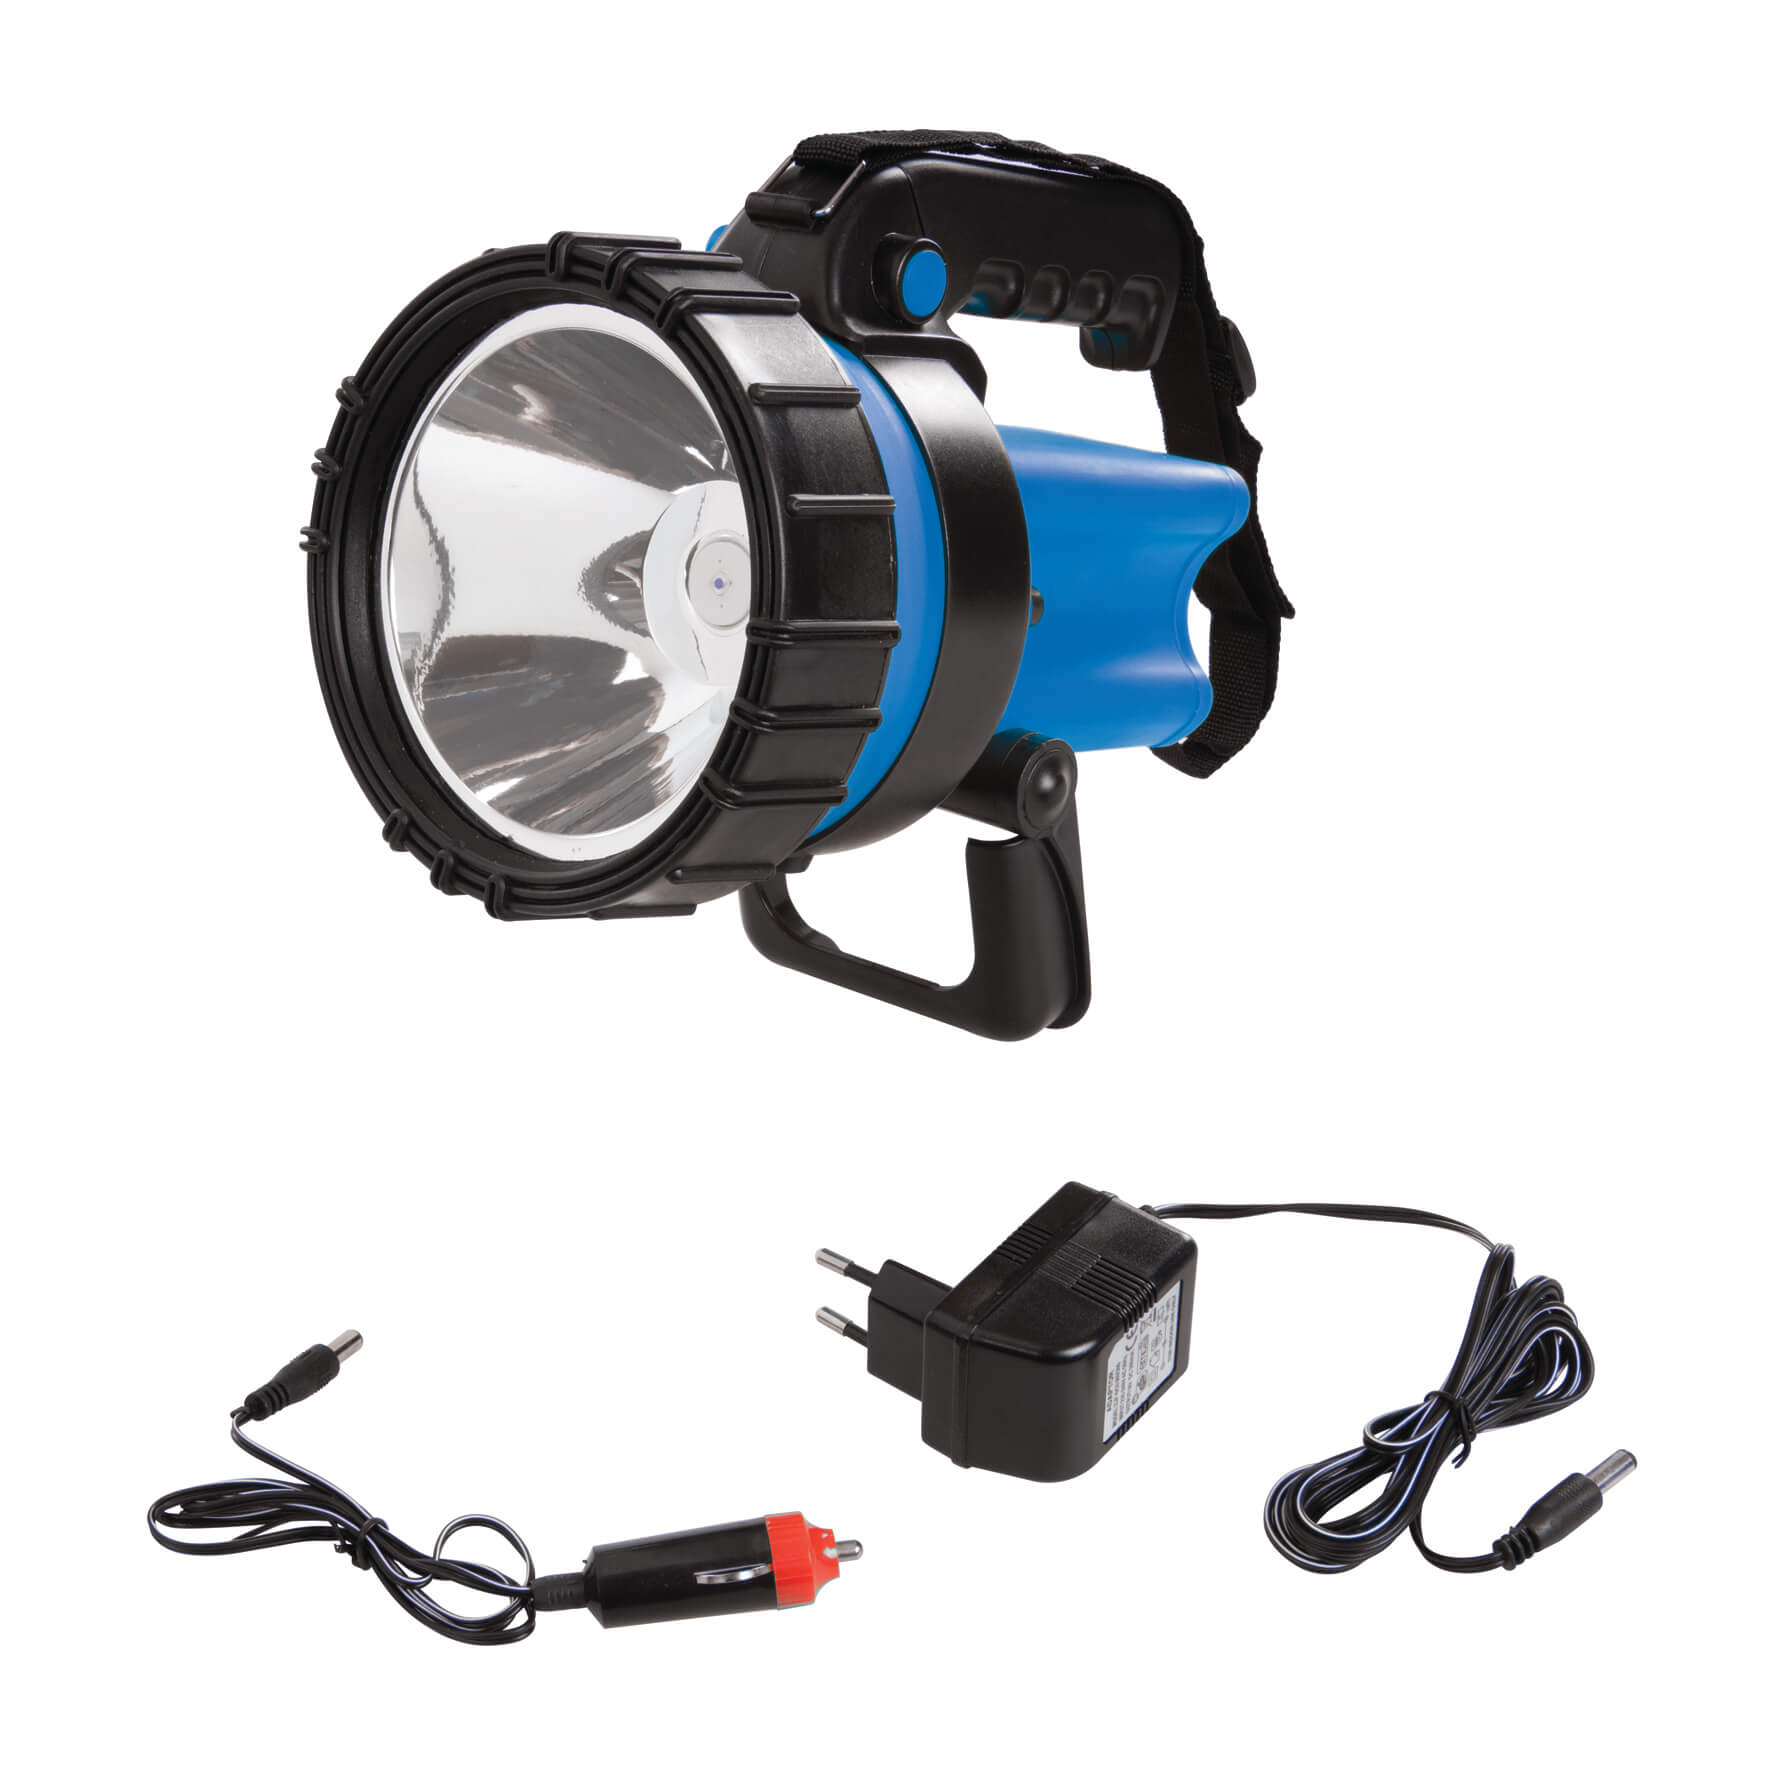 Rechargeable Lantern Torch